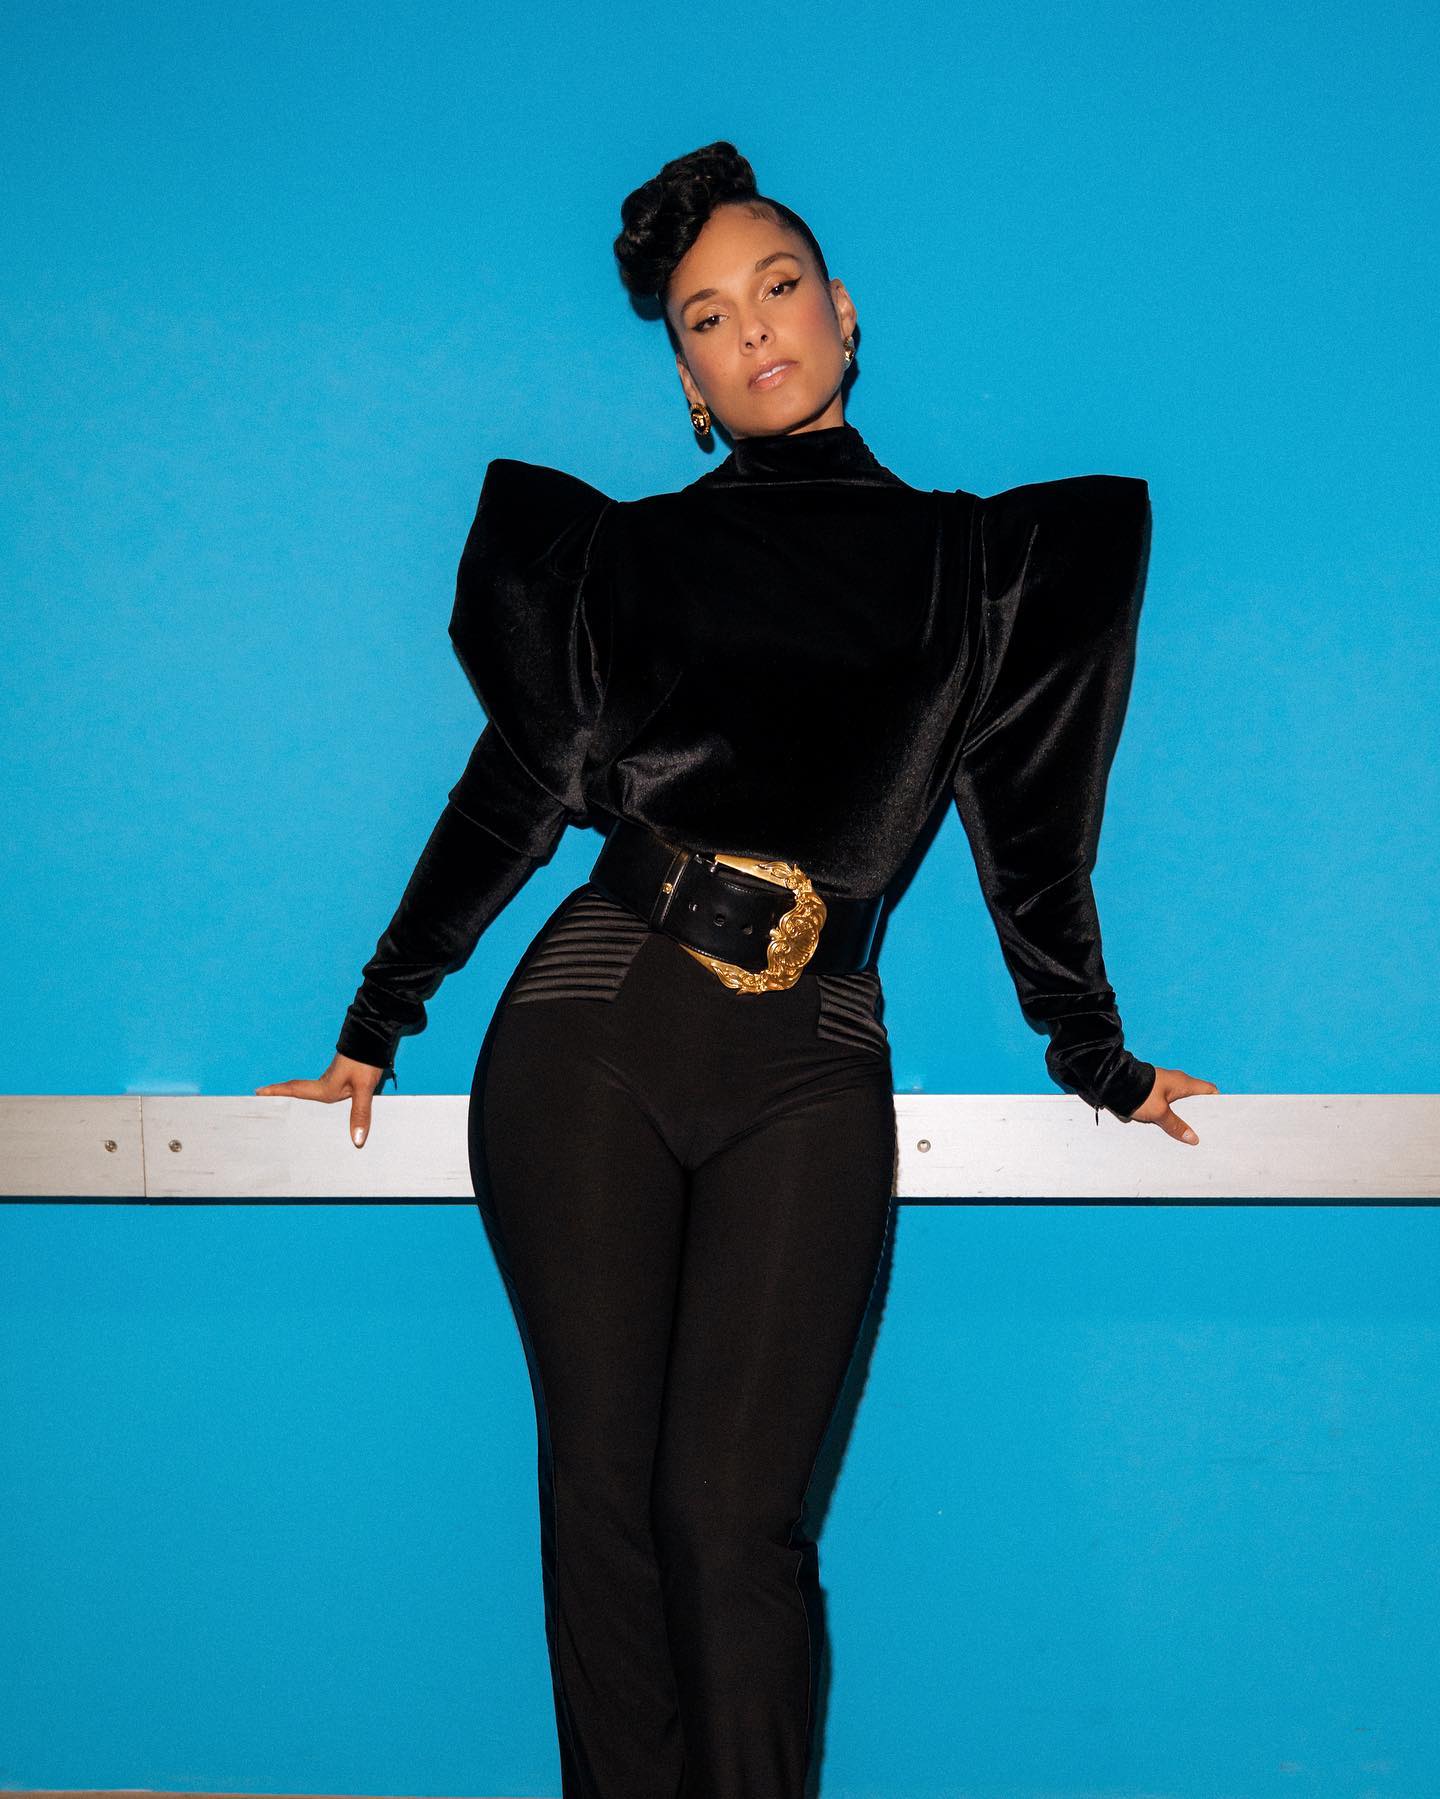 Alicia Keys- Can't Go Wrong With This Beautiful Jumpsuit